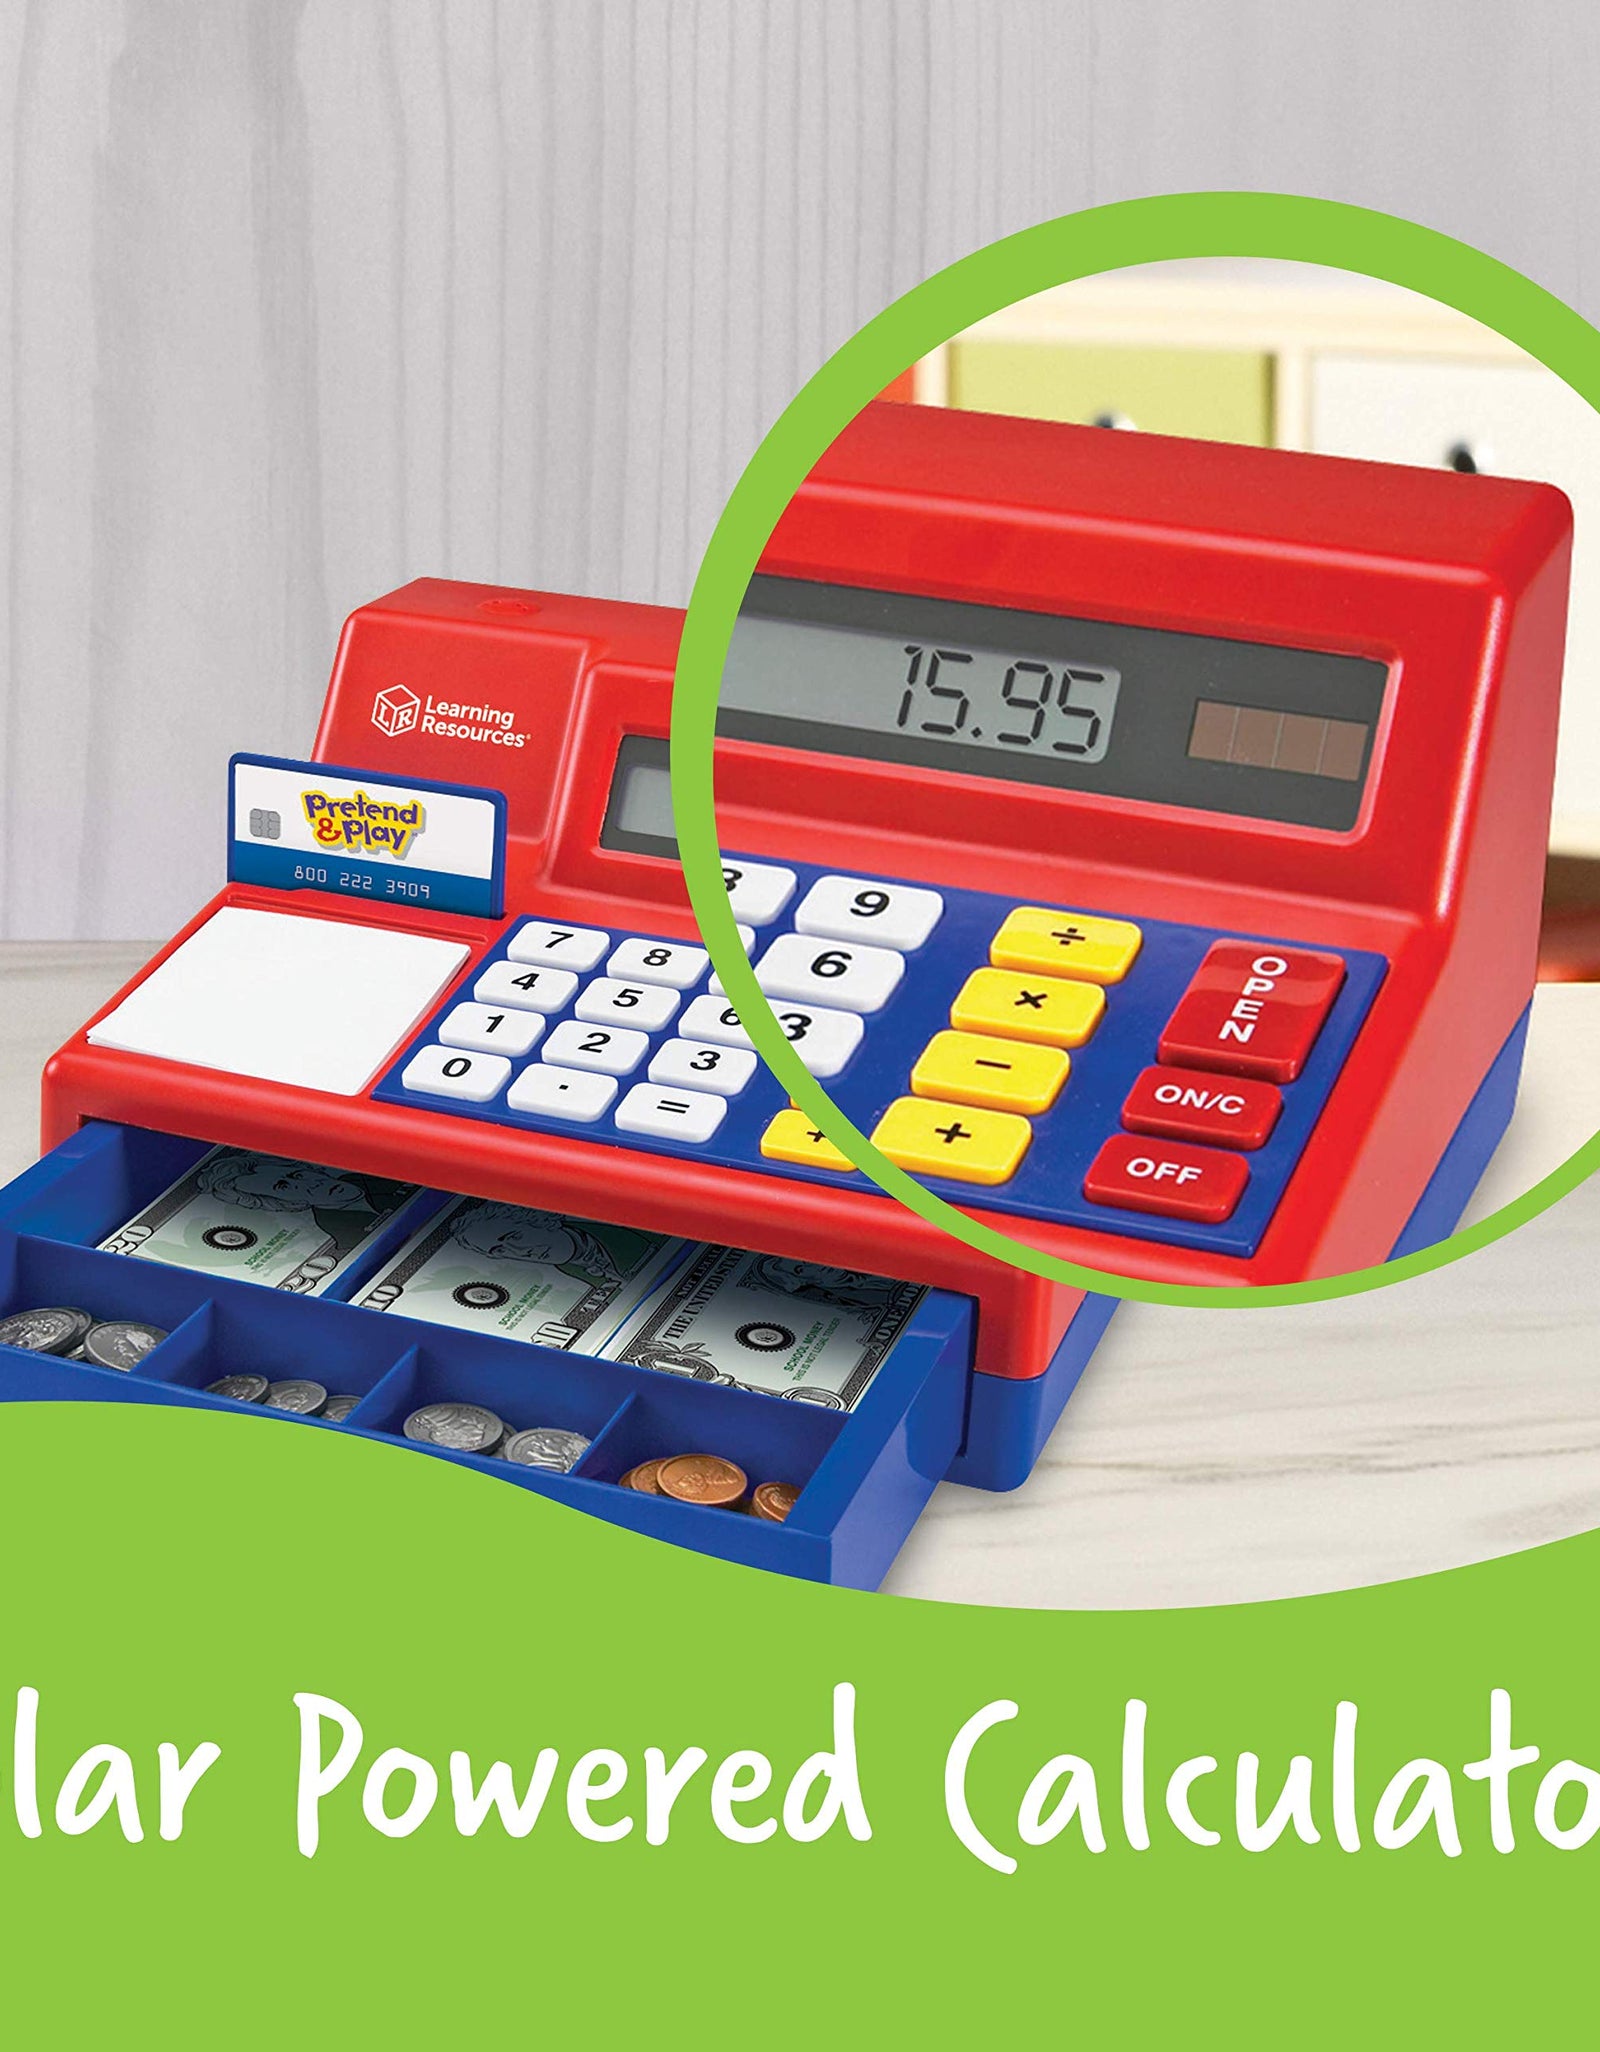 Learning Resources Pretend & Play Calculator Cash Register, Pretend Play Toys, Classic Counting Toy, Play Cash Register for Kids, Develops Early Math Skills, 73 Pieces, Ages 3+